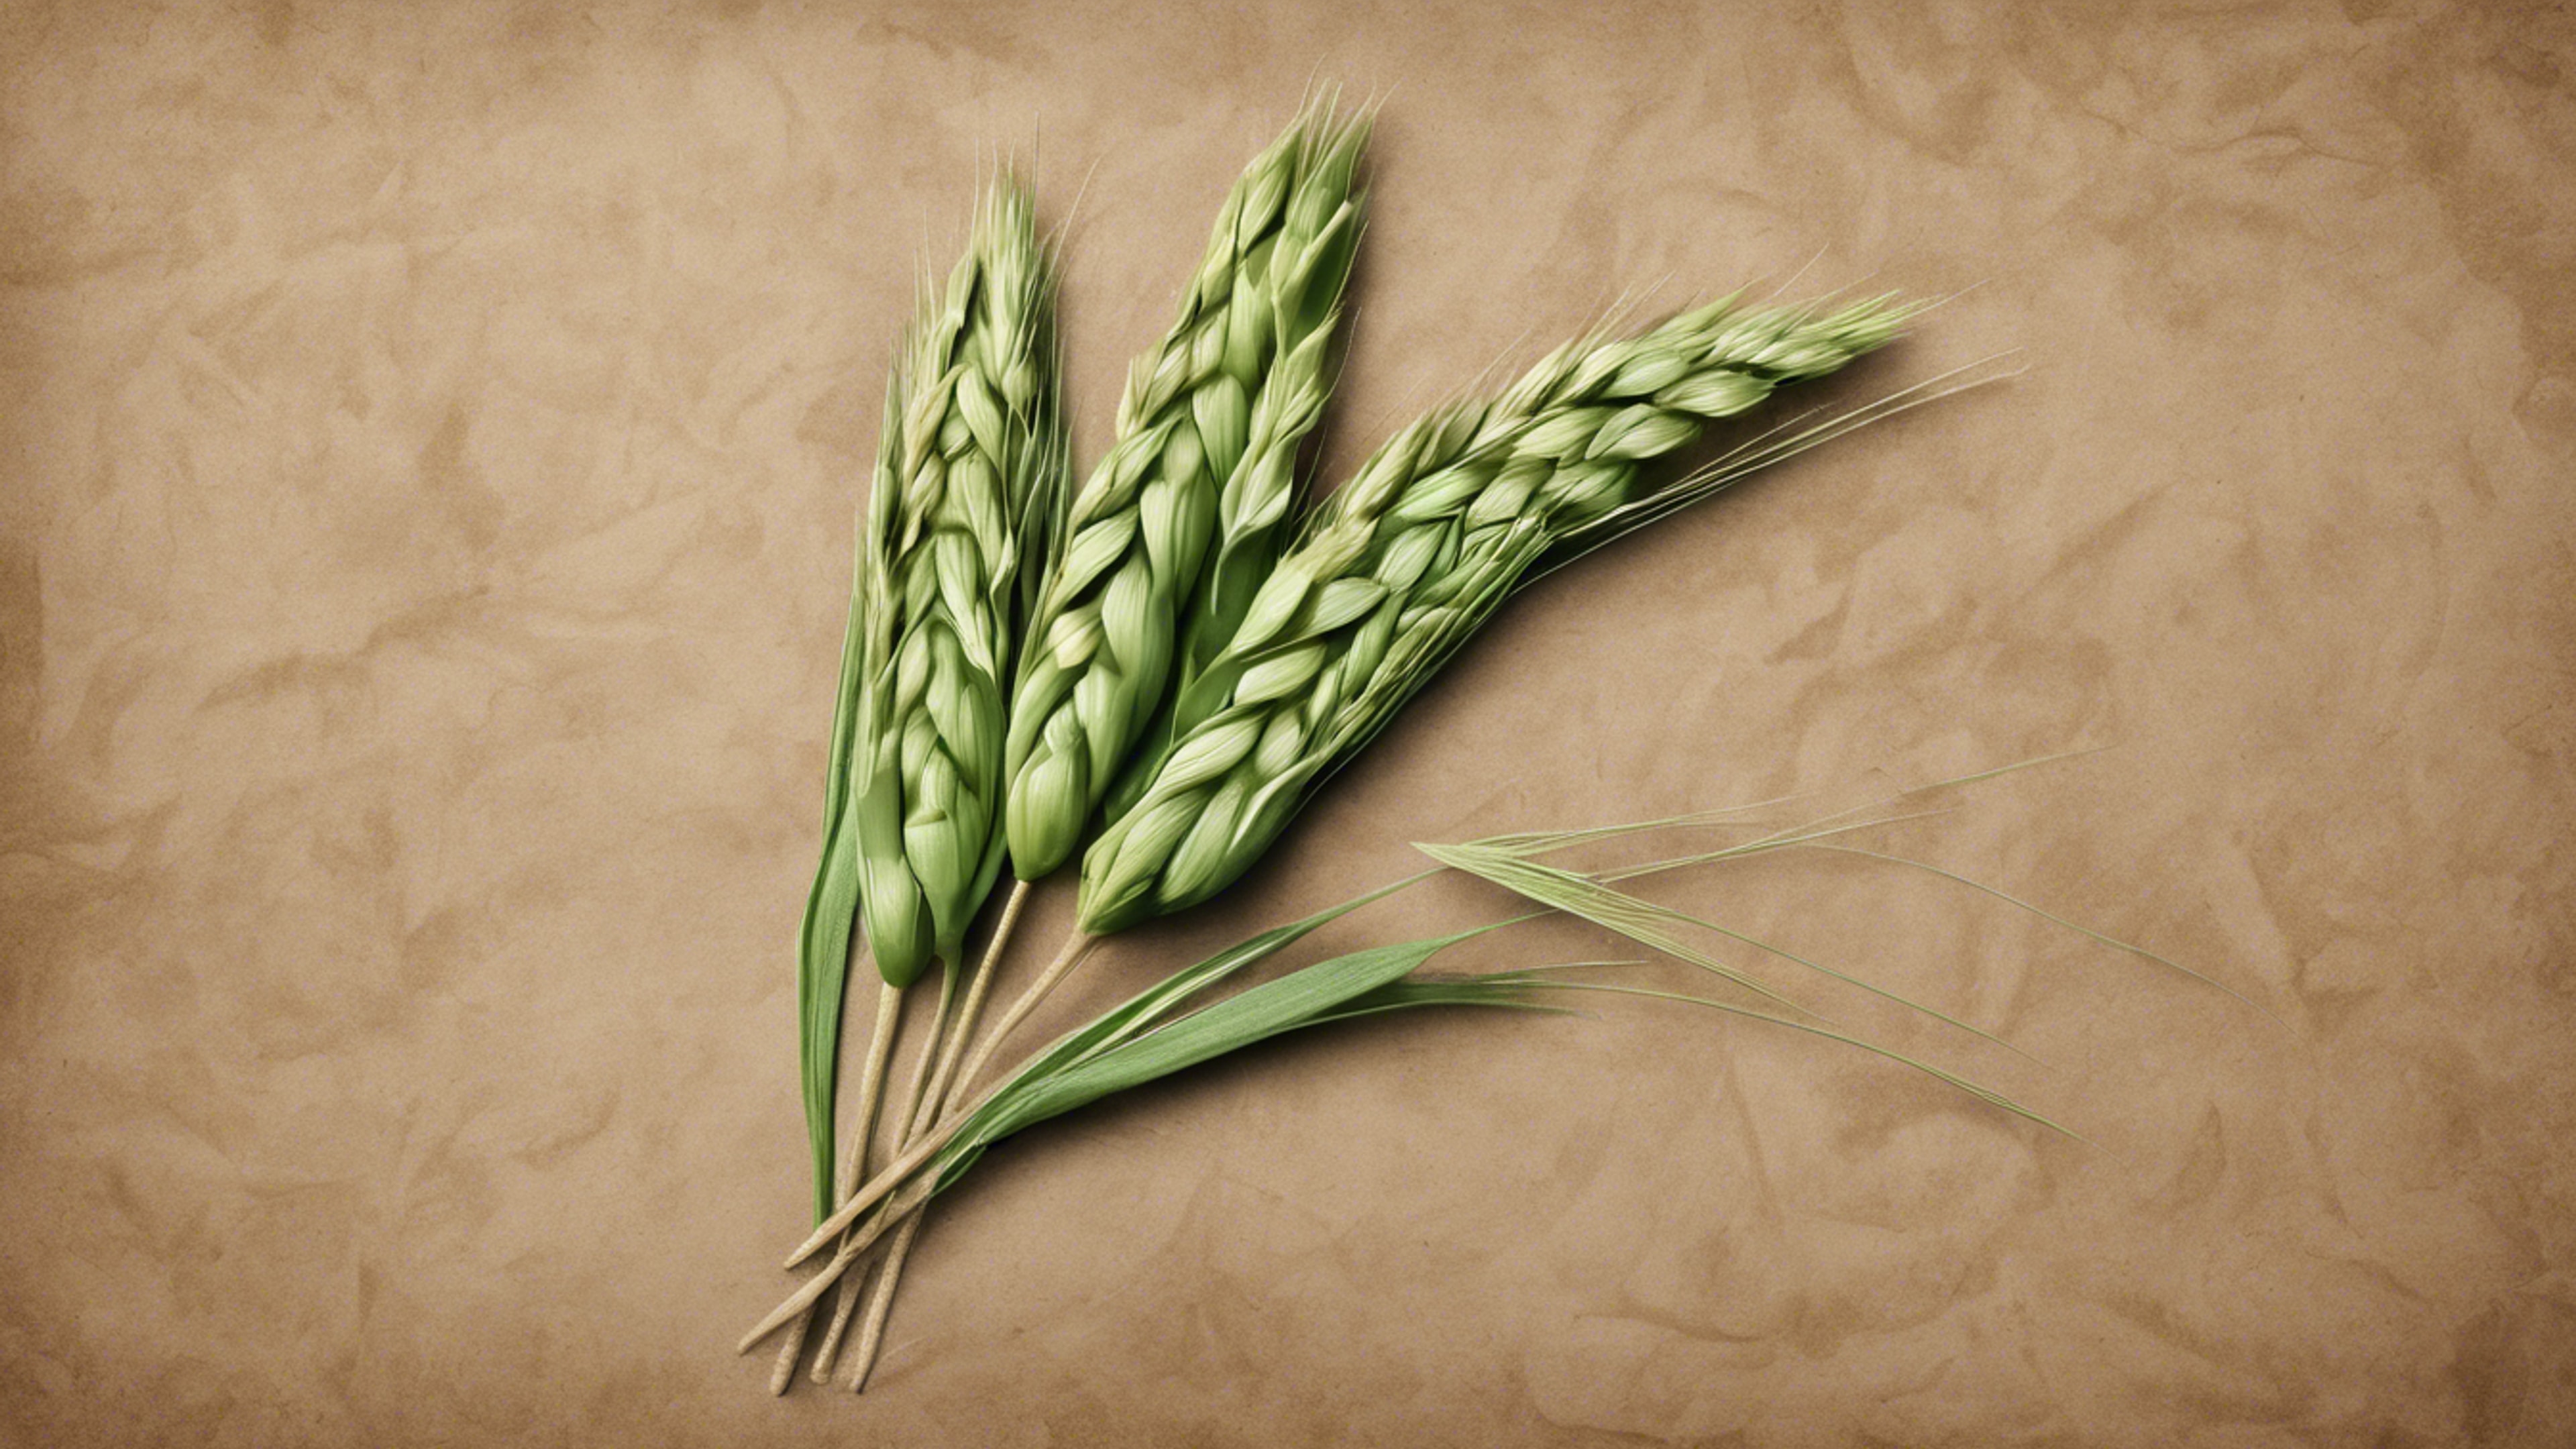 A detailed botanical illustration of a stalk of green wheat against an aged brown paper background. Tapet[958050ab552342b3bed0]